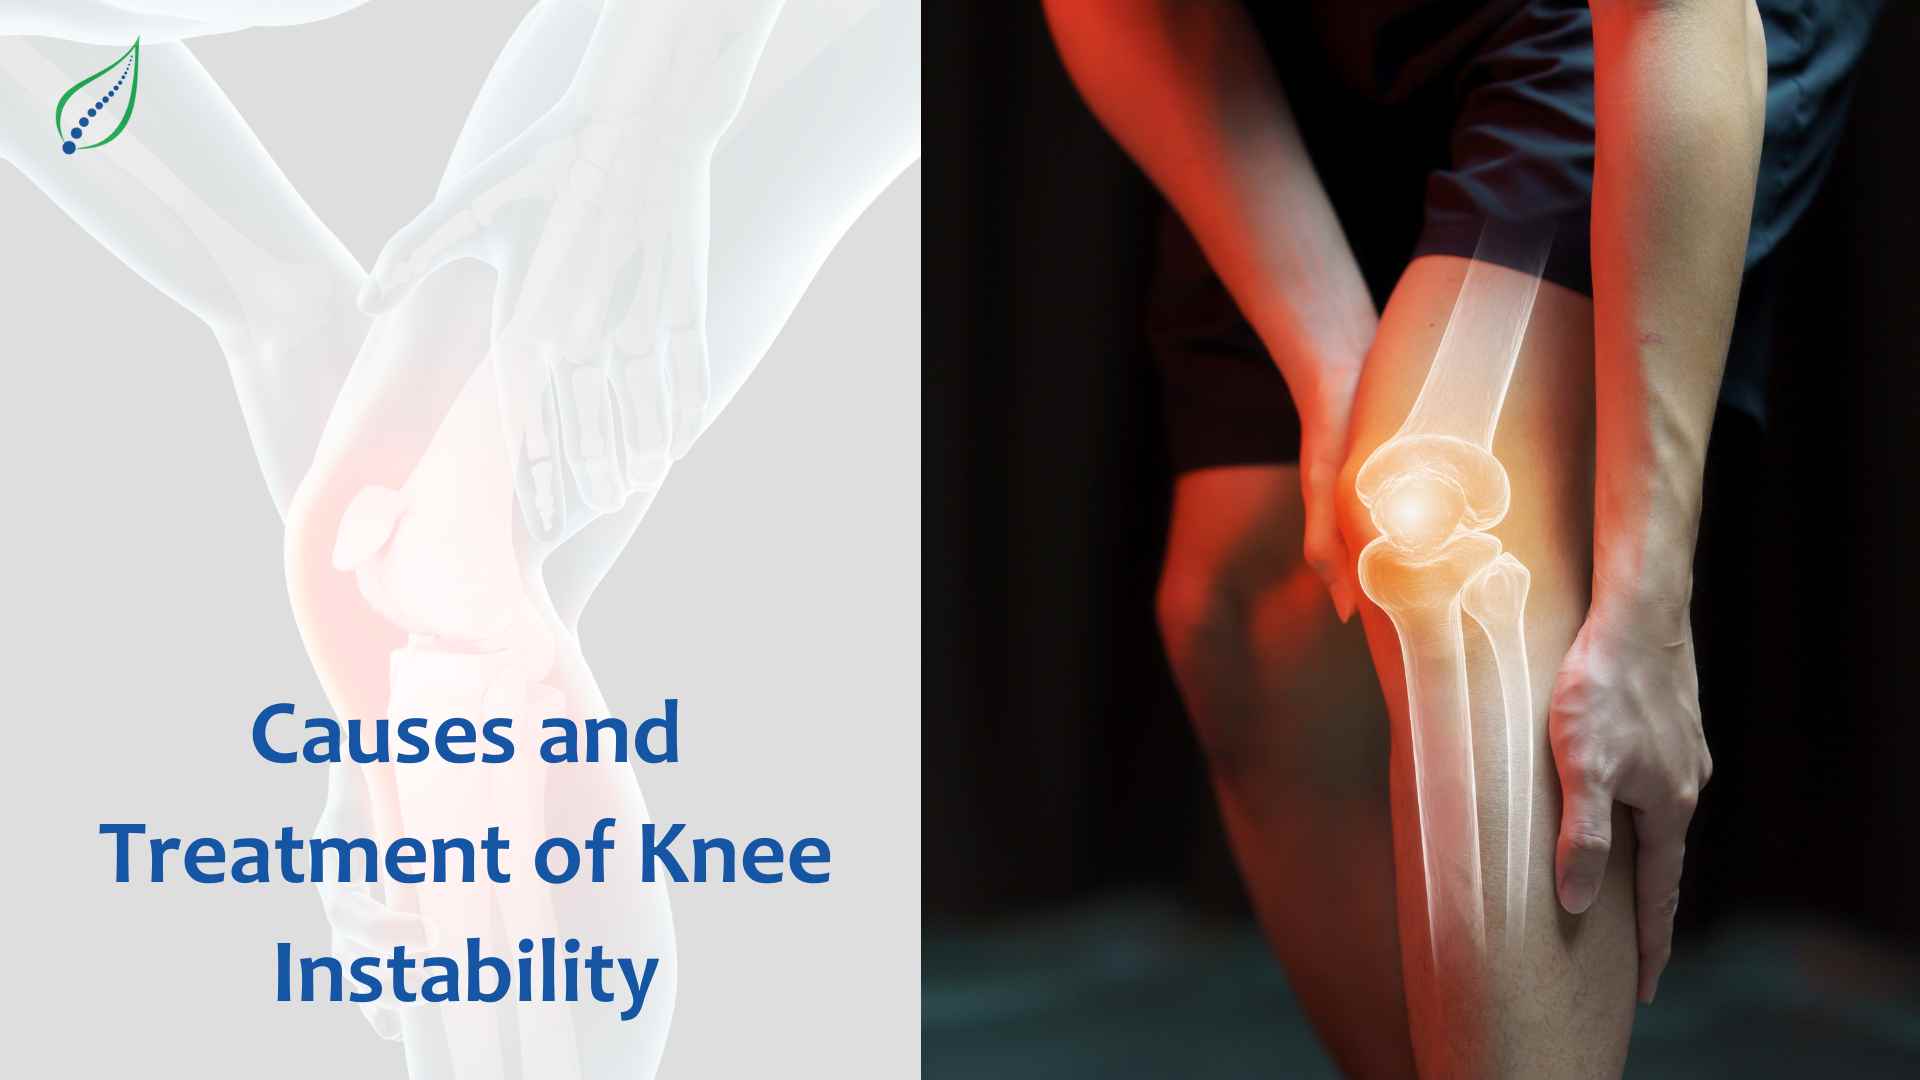 Causes and Treatment of Knee Instability